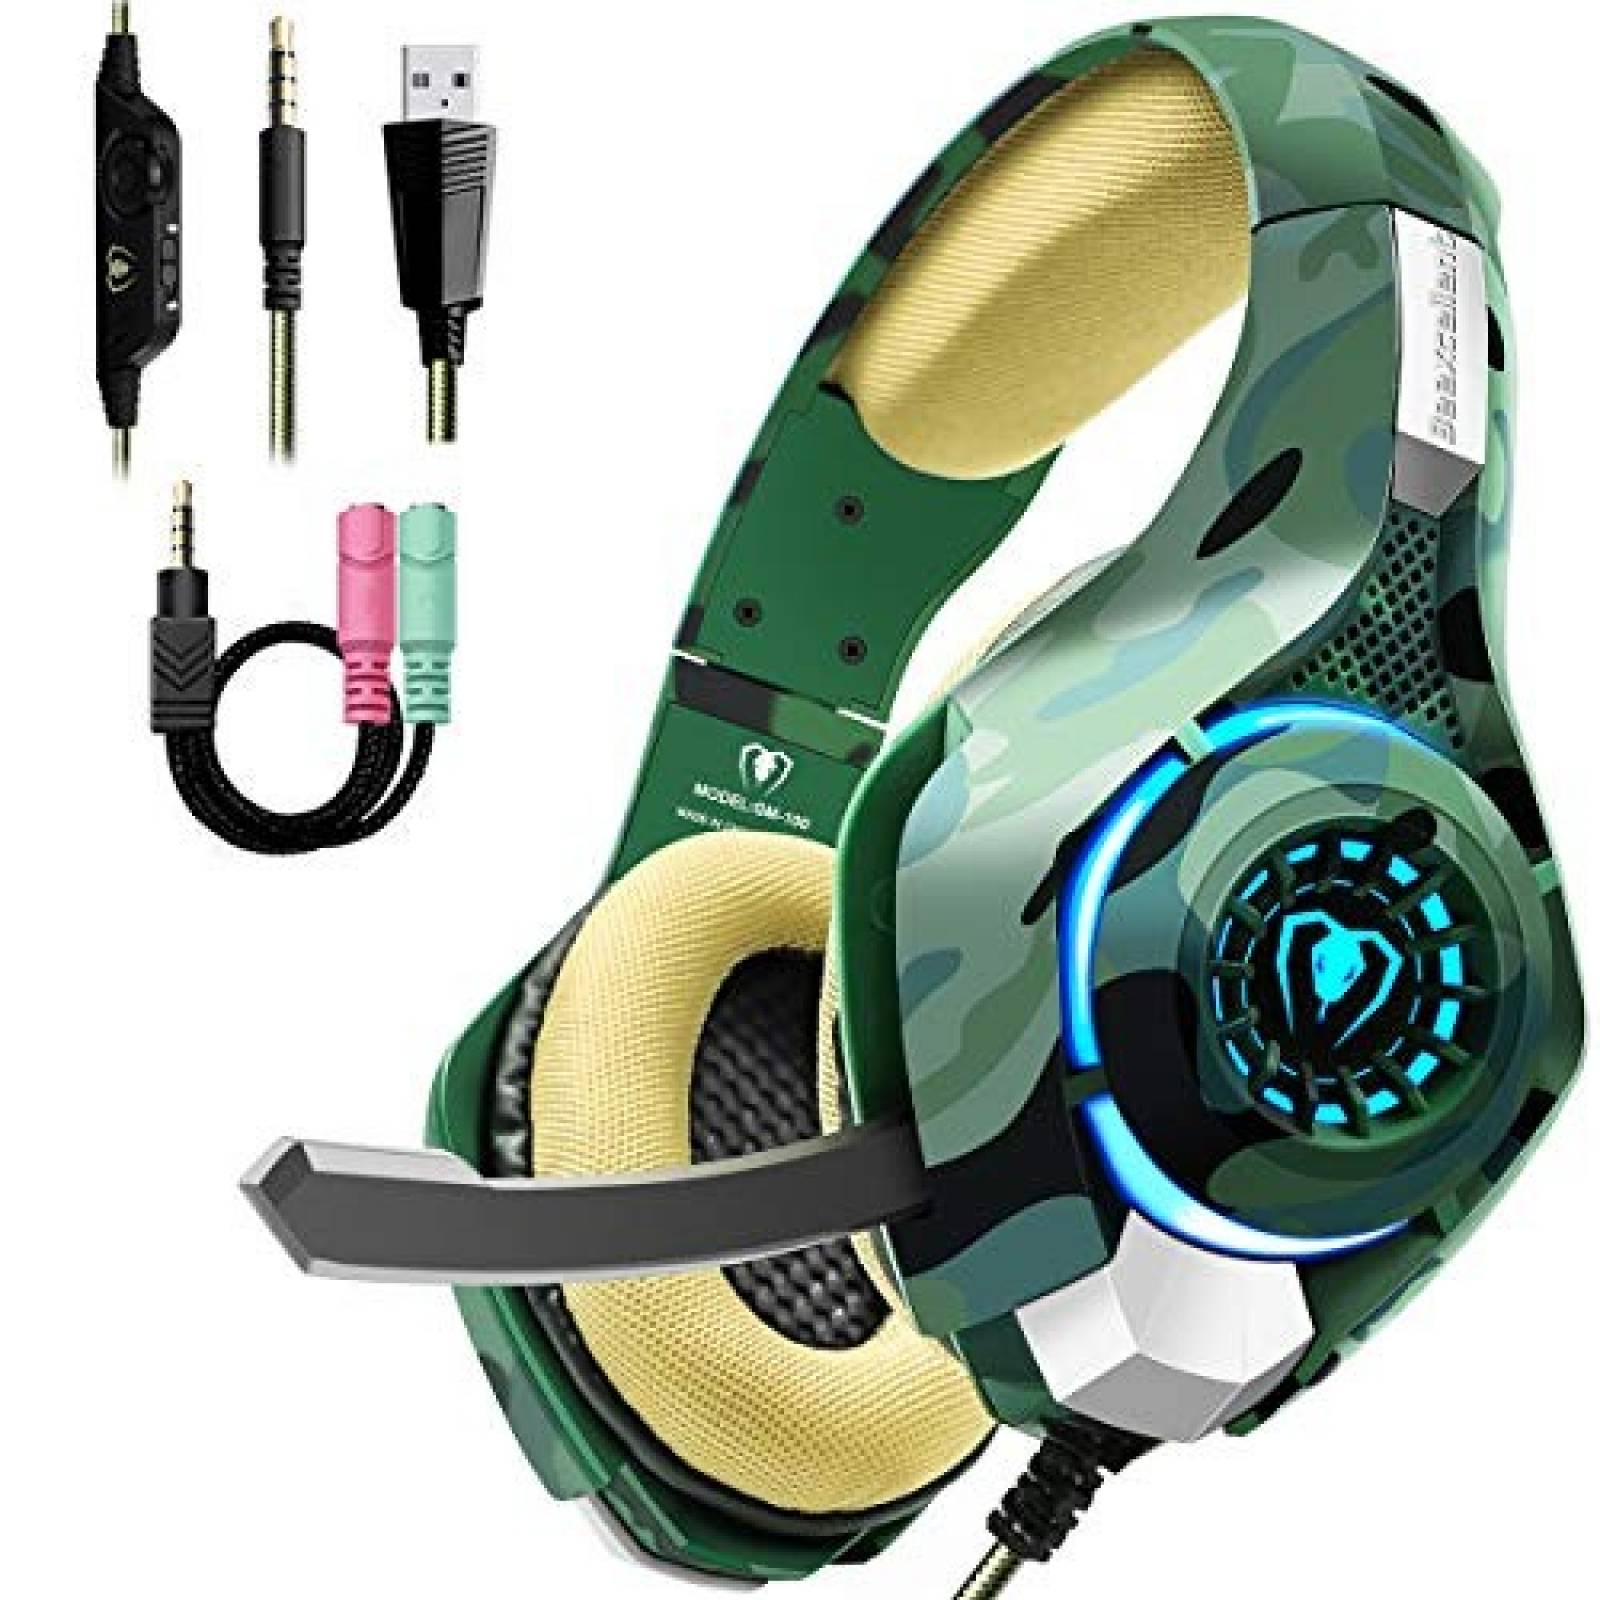 Auriculares Beexcellent gaming p/ PS4 PC Xbox One -Camo